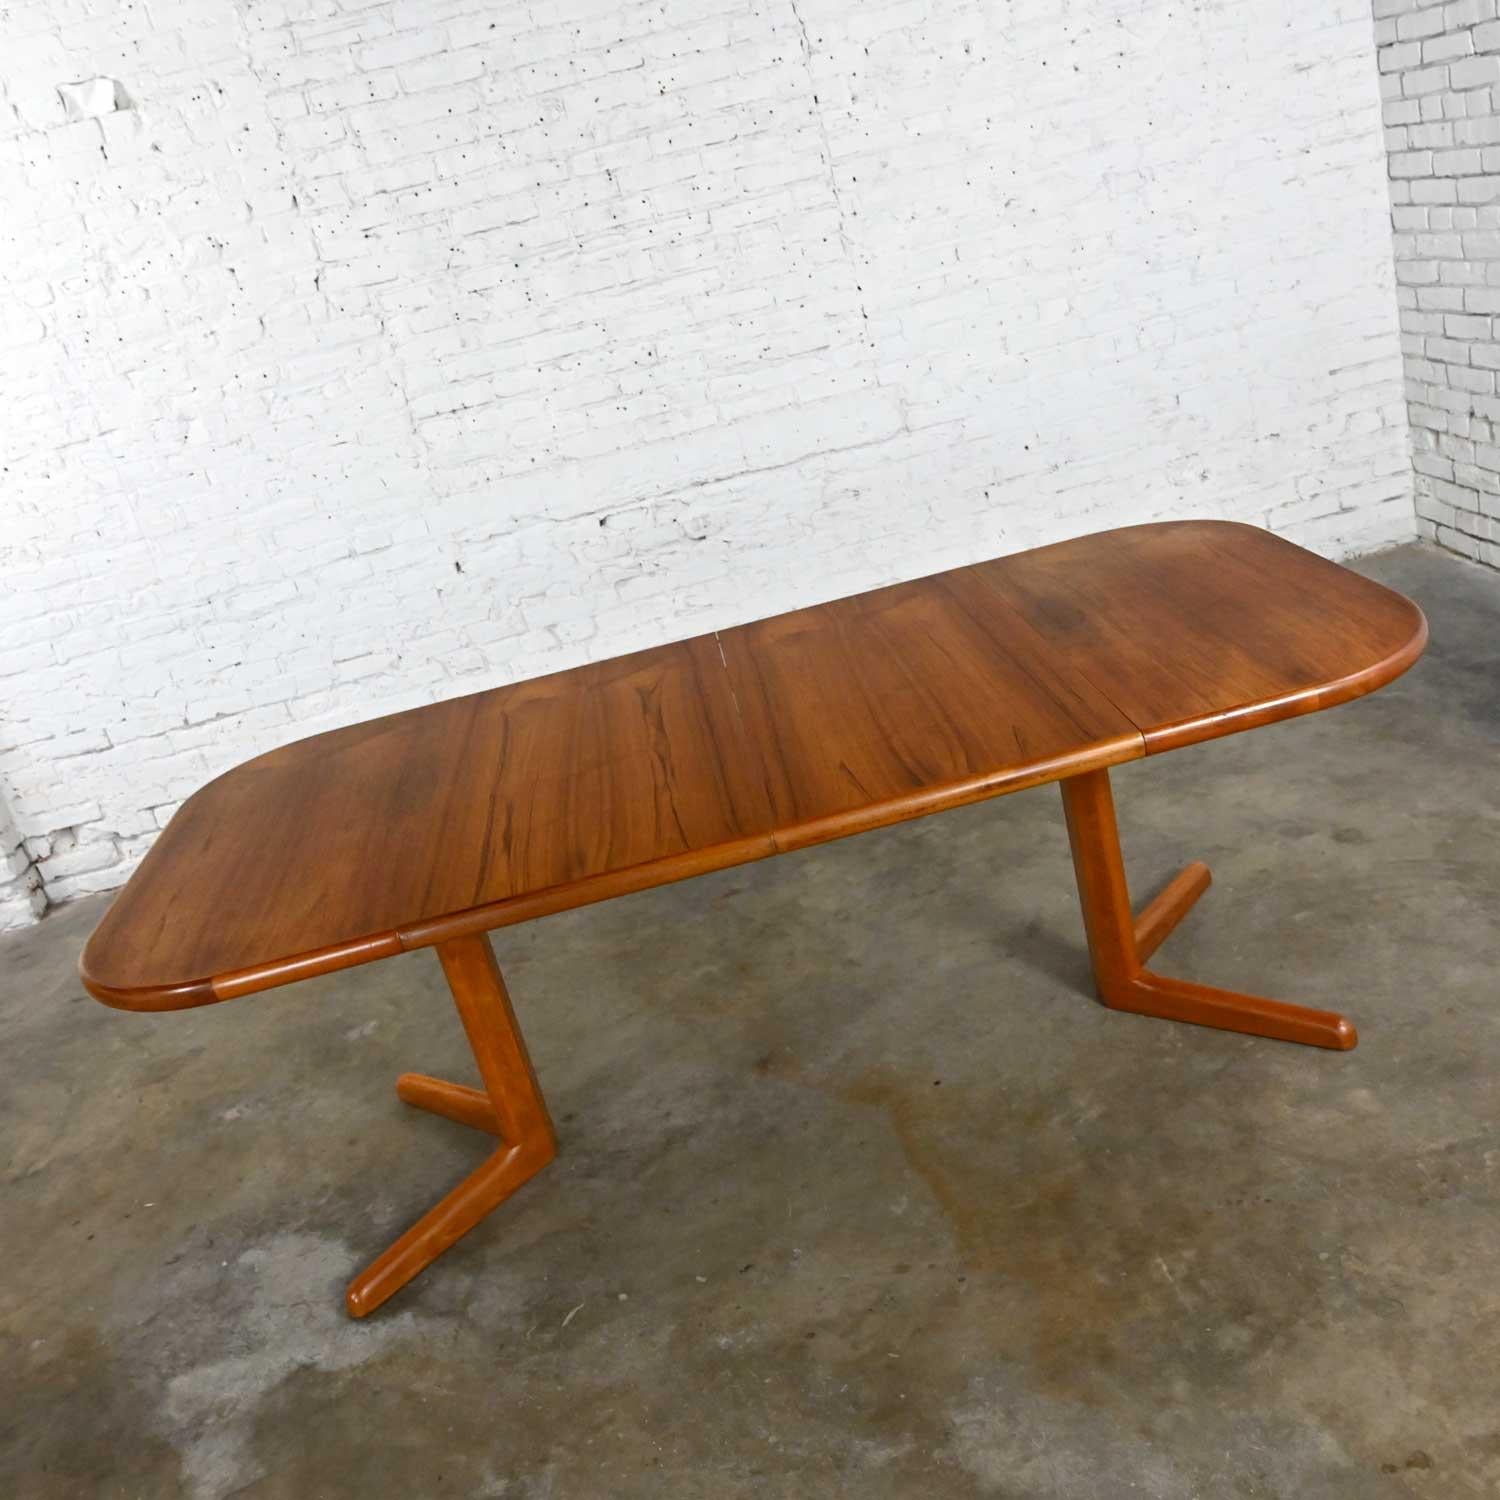 Gorgeous vintage teak Scandinavian Modern expanding dining table with 2 leaves. Unmarked but style of Neils Moller for Gudme Mobelfabrik. Beautiful condition, keeping in mind that this is vintage and not new so will have signs of use and wear. The